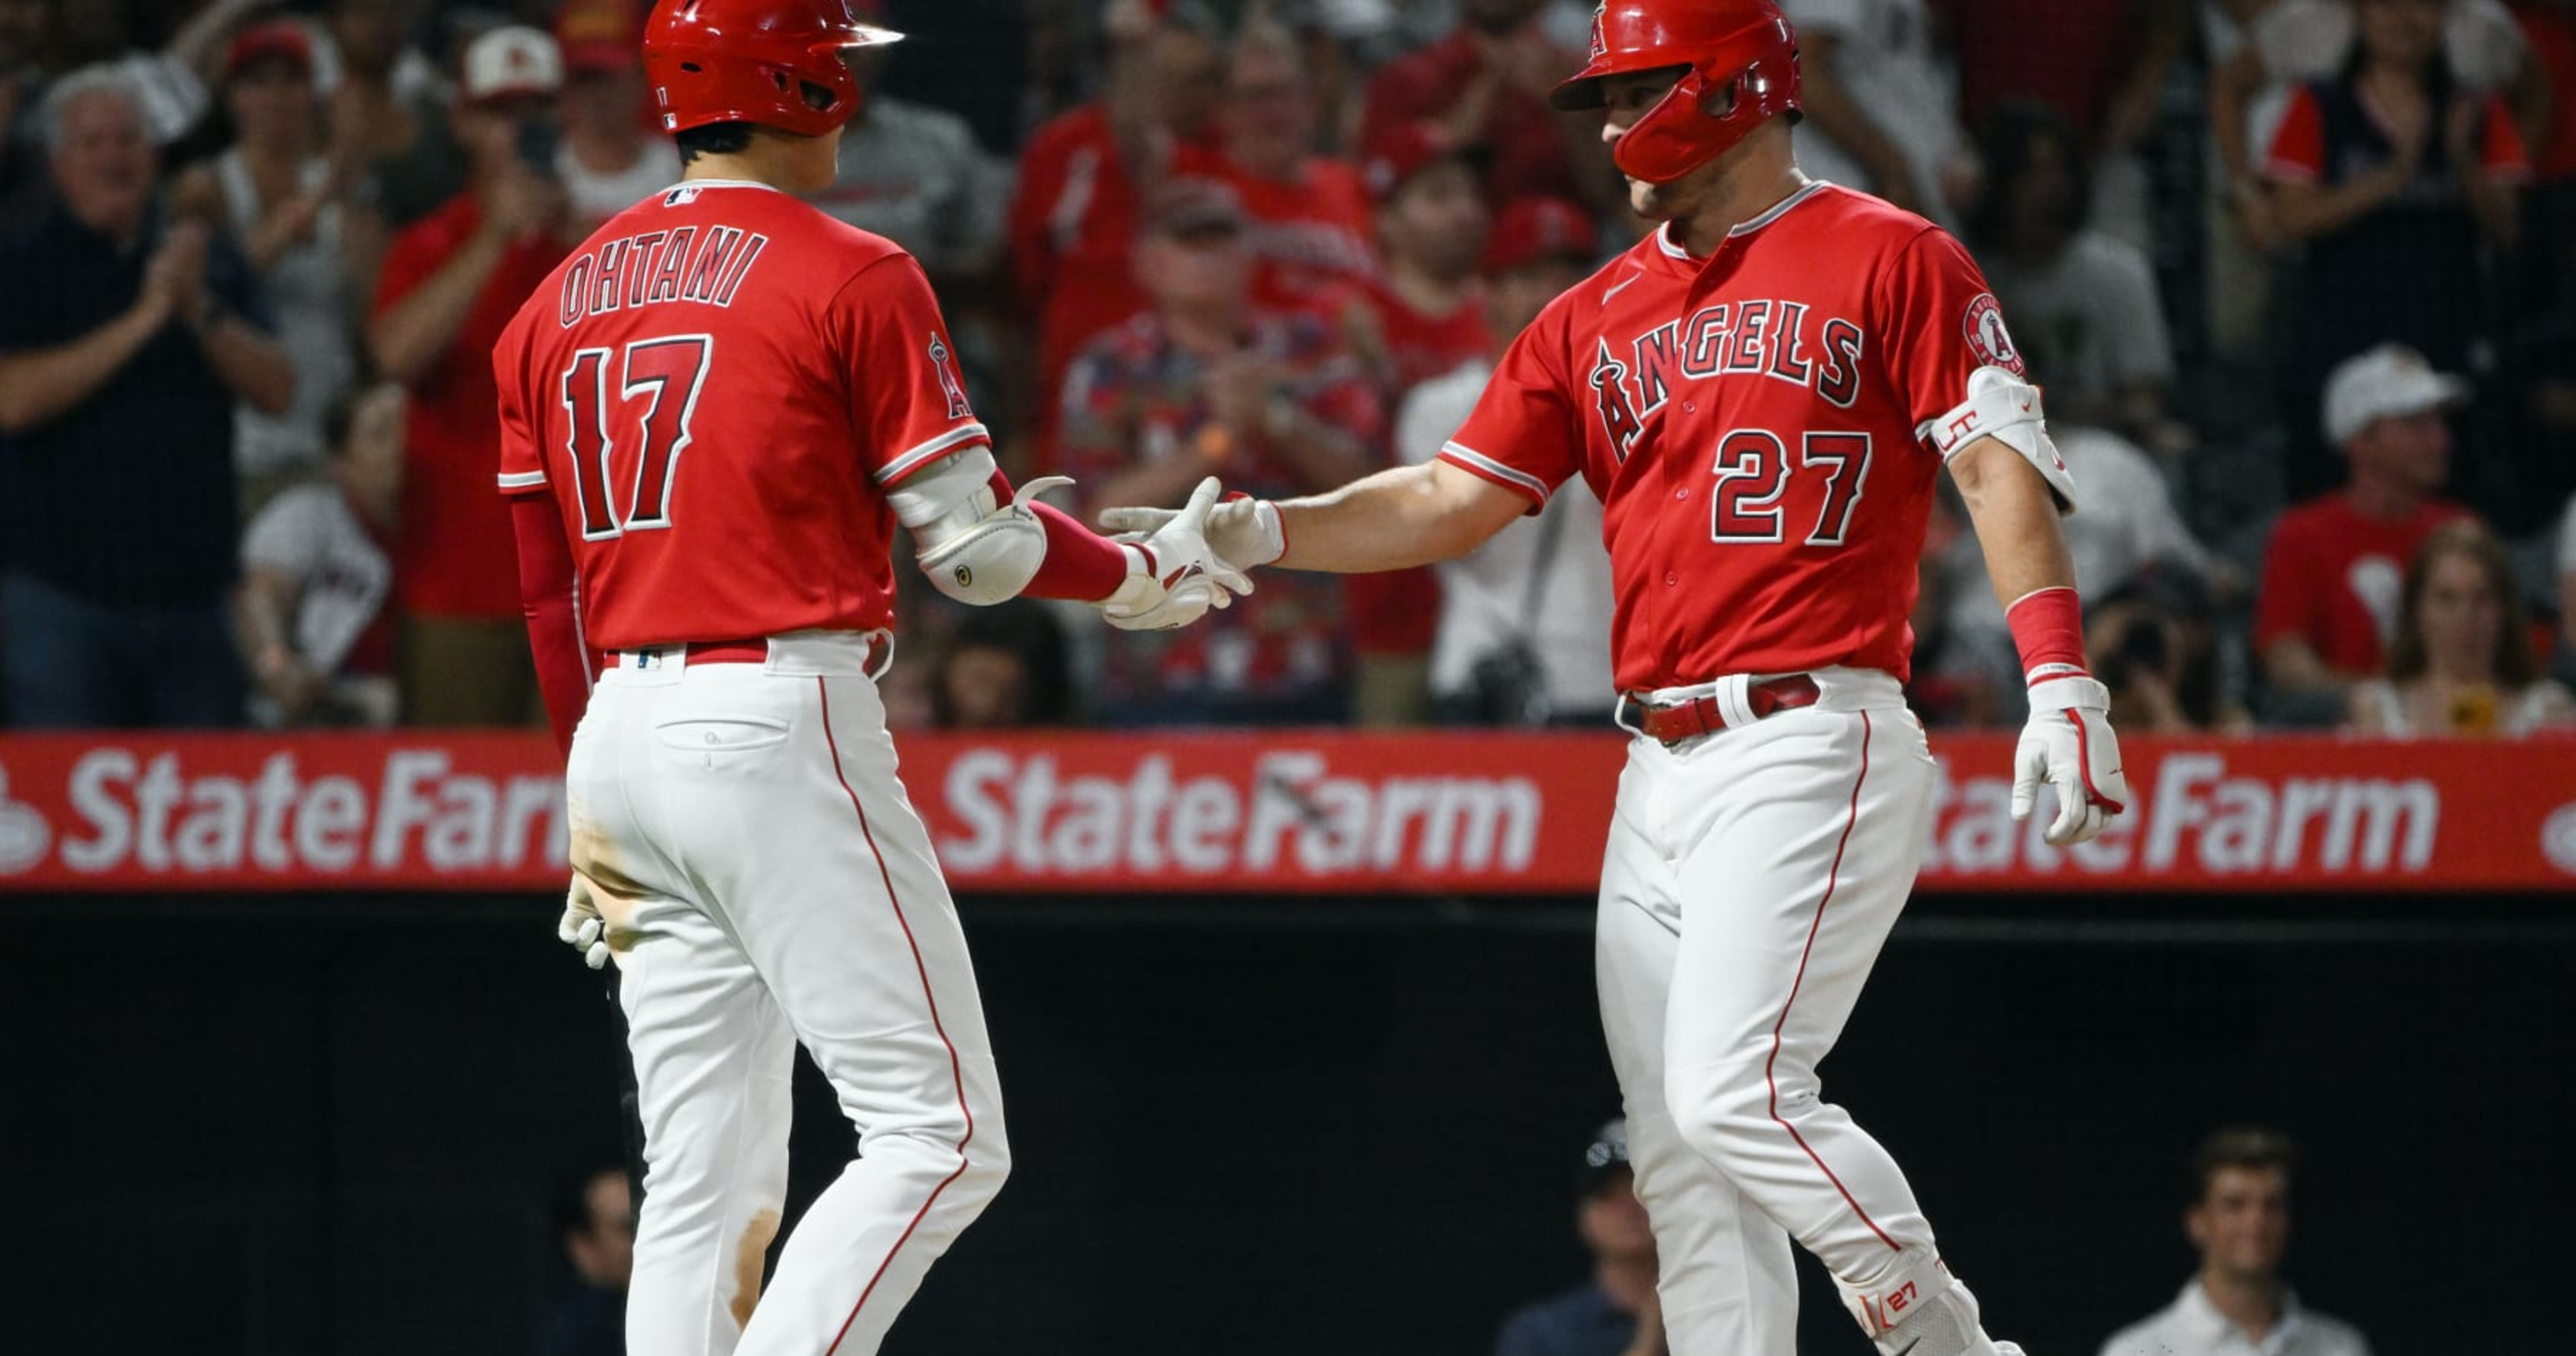 Mike Trout 'Going to Do Everything I Can' to Keep Shohei Ohtani